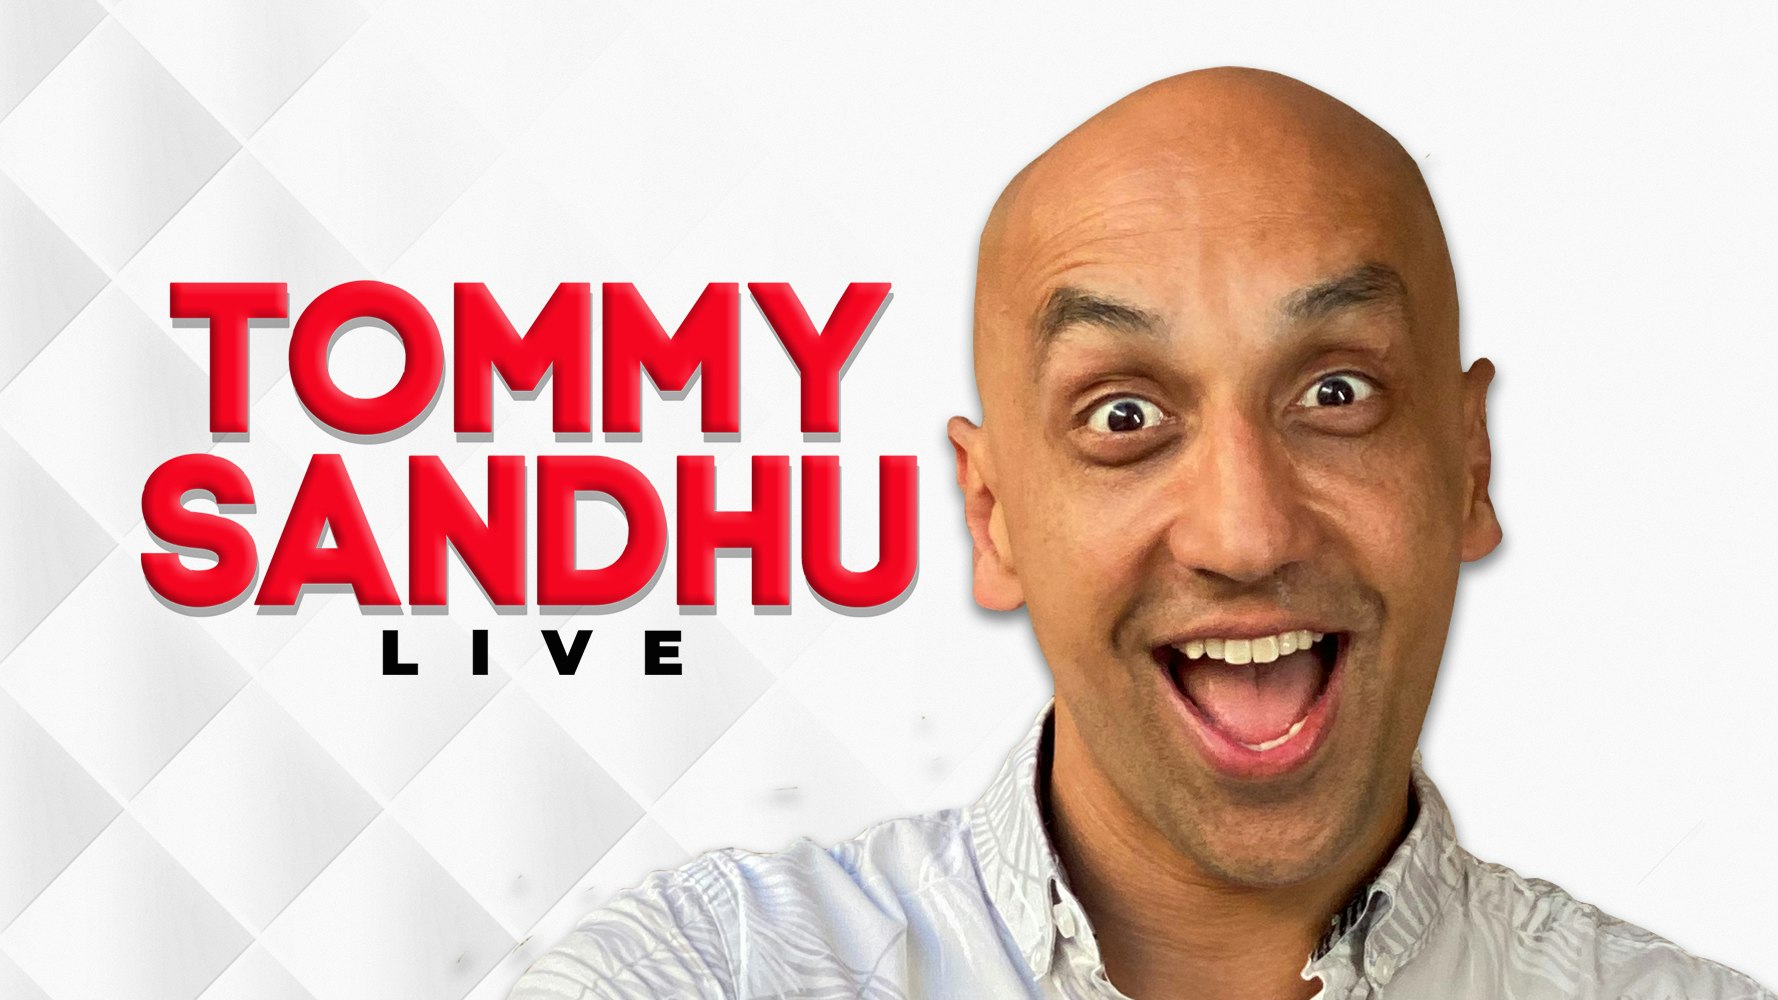 Tommy Sandhu : Live – Leicester